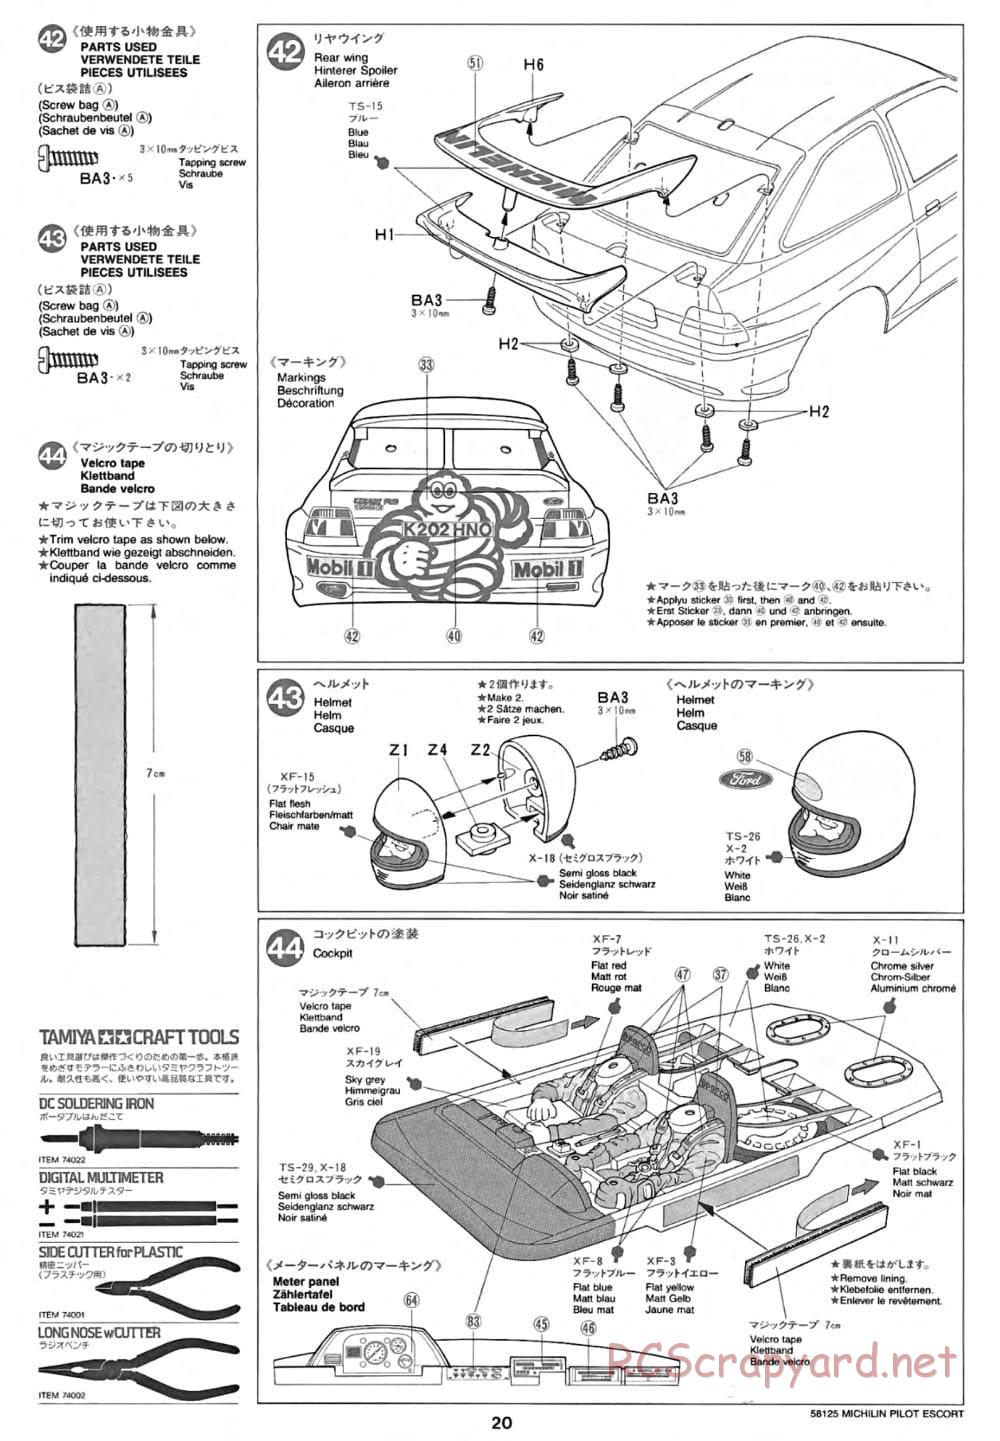 Tamiya - Michelin Pilot Ford Escort RS Cosworth - TA-01 Chassis - Manual - Page 21